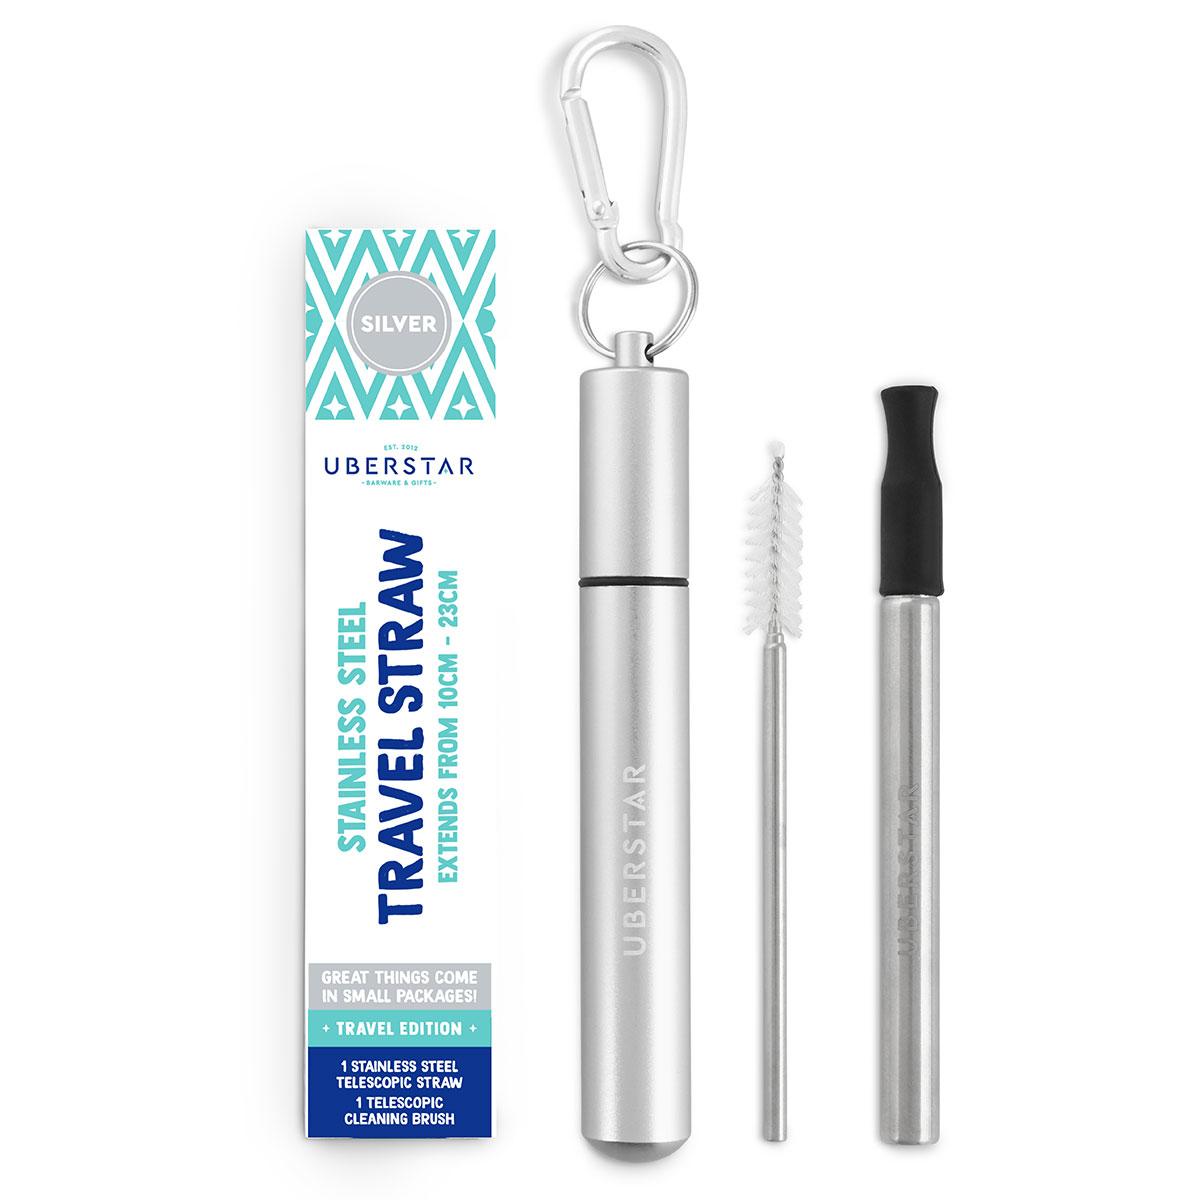 Uberstar Collapsible Travel Stainless Steel Straw - Silver